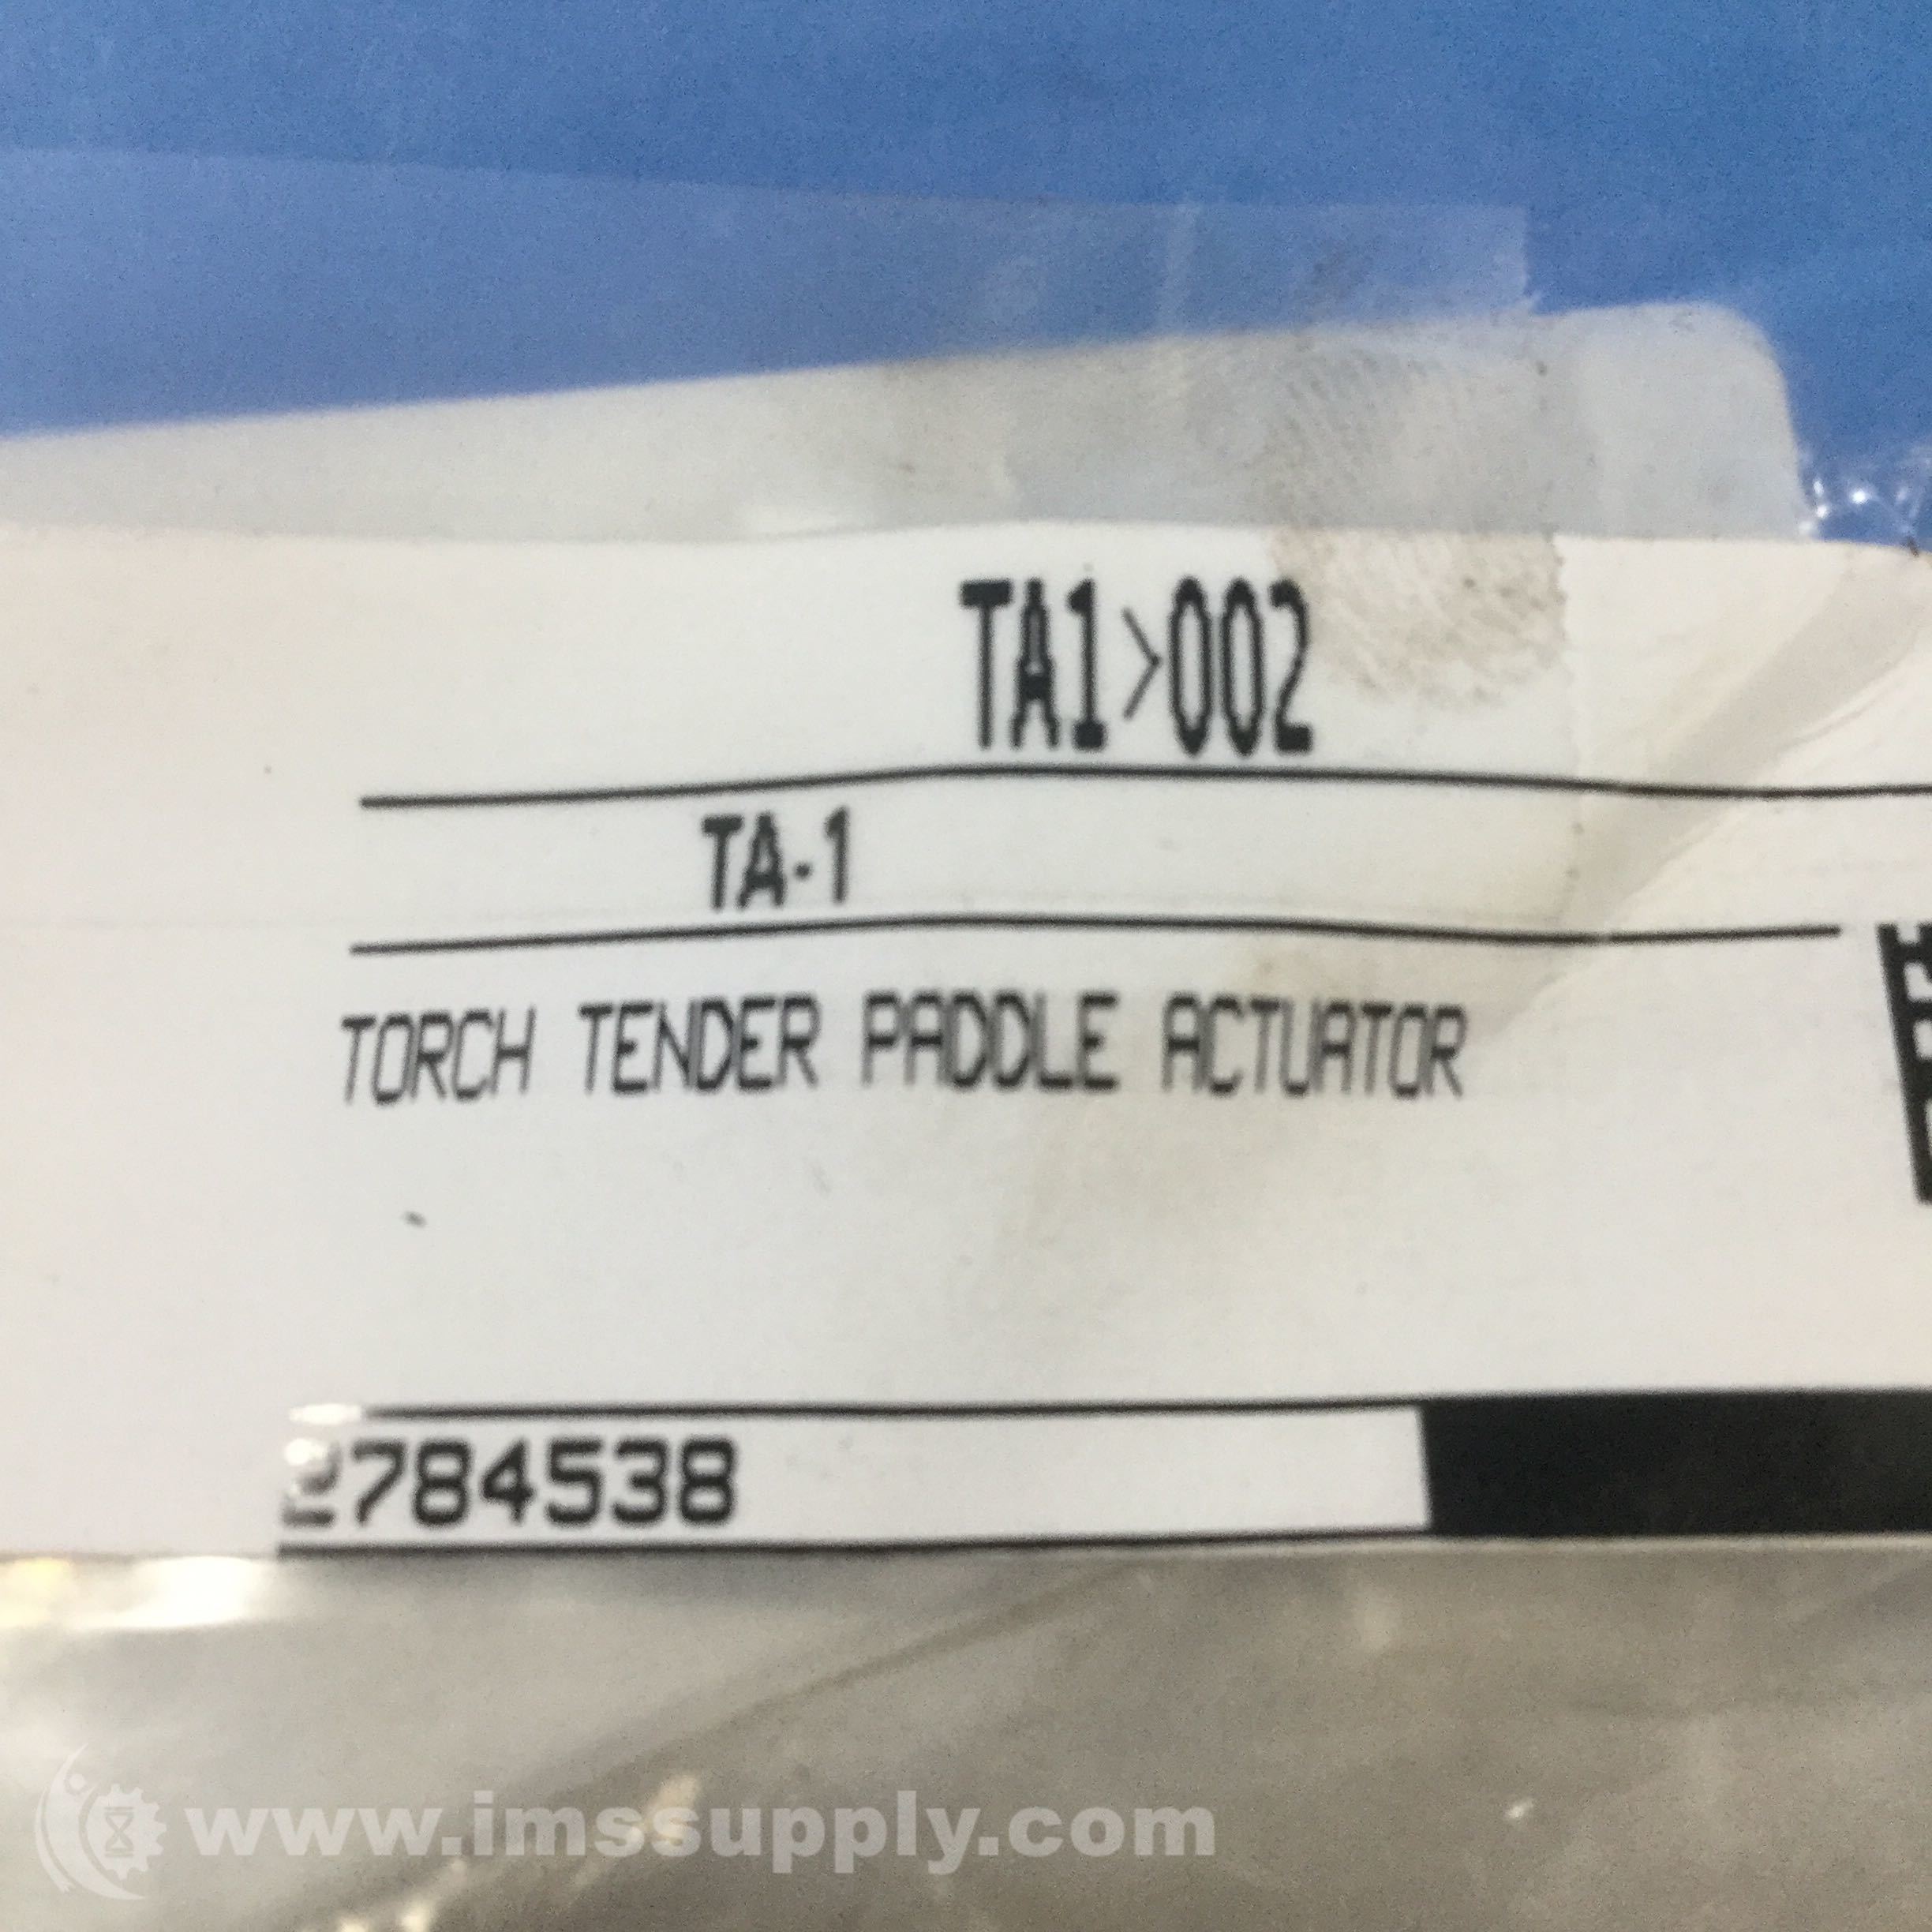 AUTOMATION PERIPHERALS  TA1002 TORCH TENDER PADDLE ACTUATOR USIP 